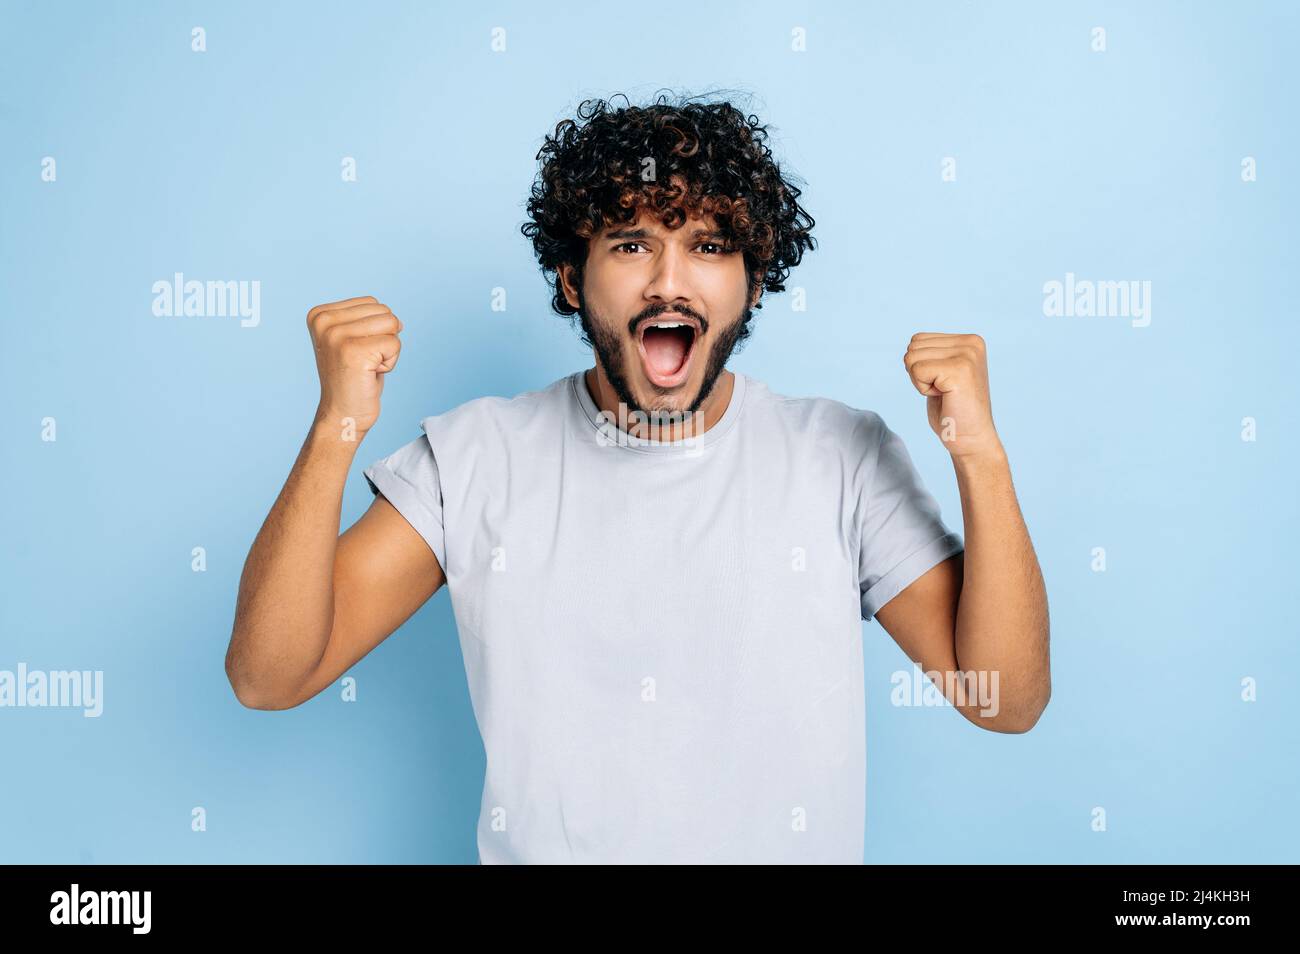 Win, triumph. Excited amazed indian or arabian guy, in t-shirt, rejoices in success, victory, win, gesturing with fists, looking at camera, smiling, standing on an isolated blue background, shouting Stock Photo